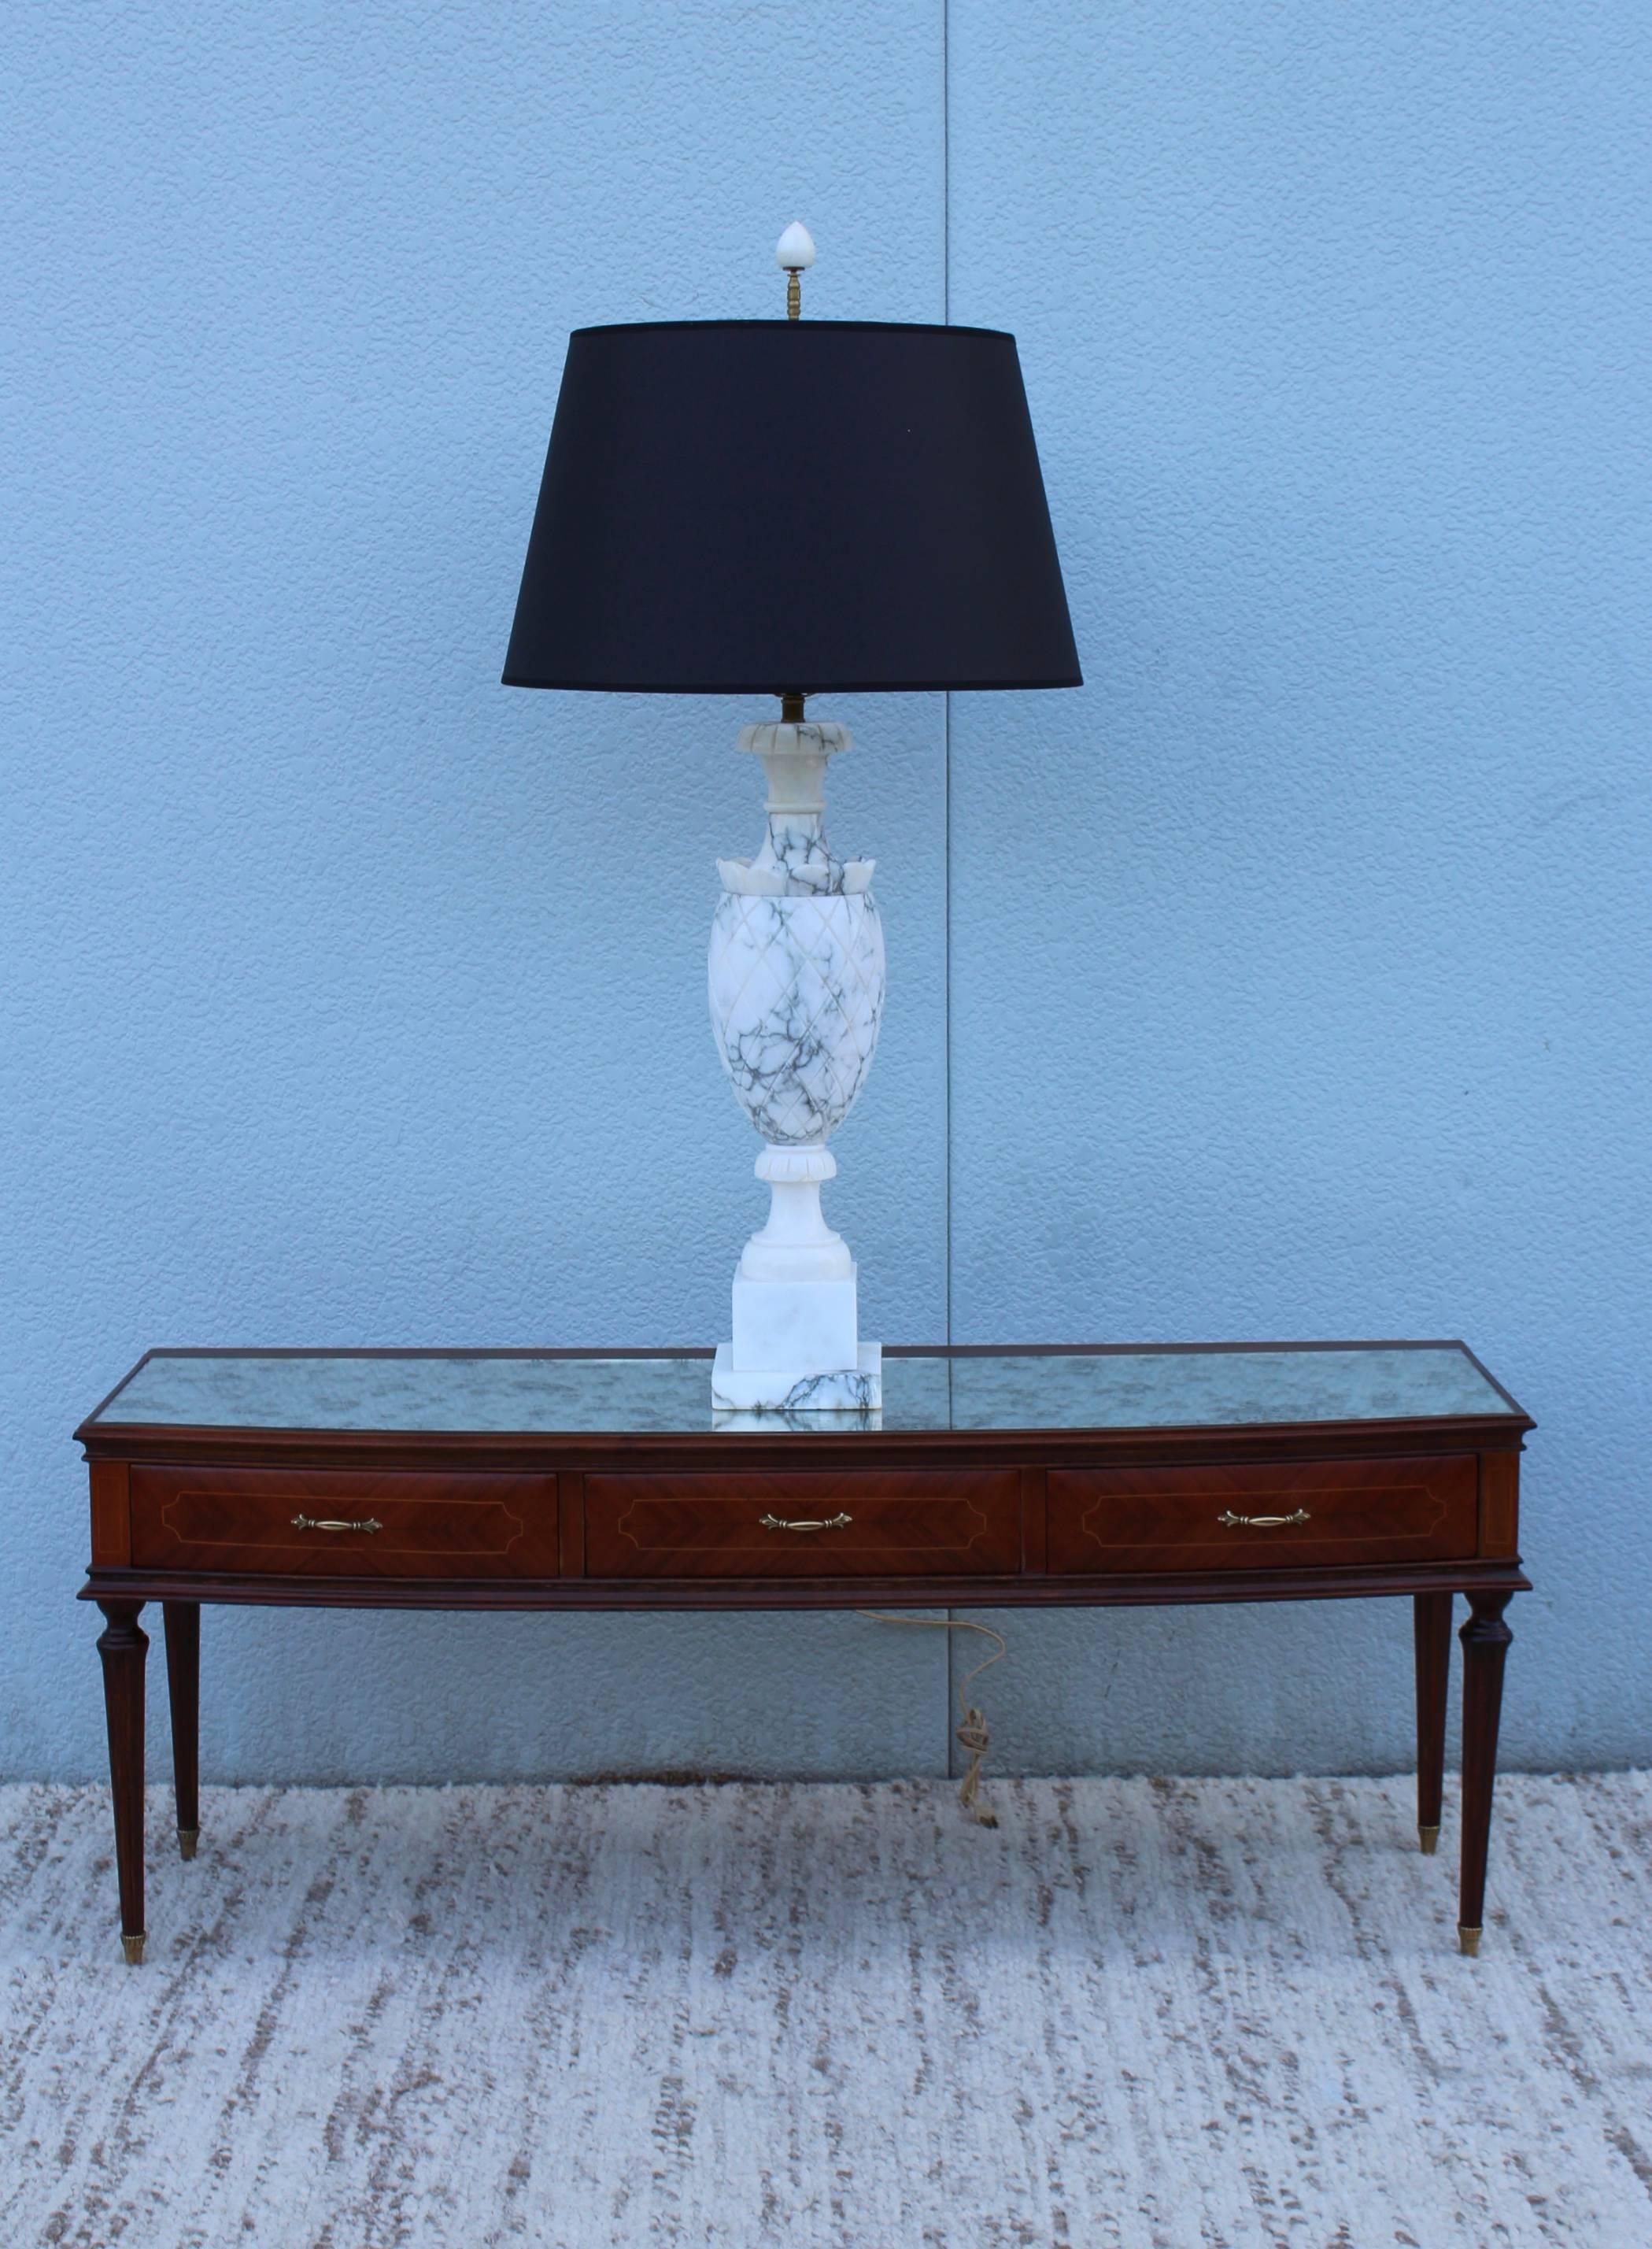 1960s carved marble tall Italian table lamp.

Measure: Height to light socket 27''

Shade for photography only.